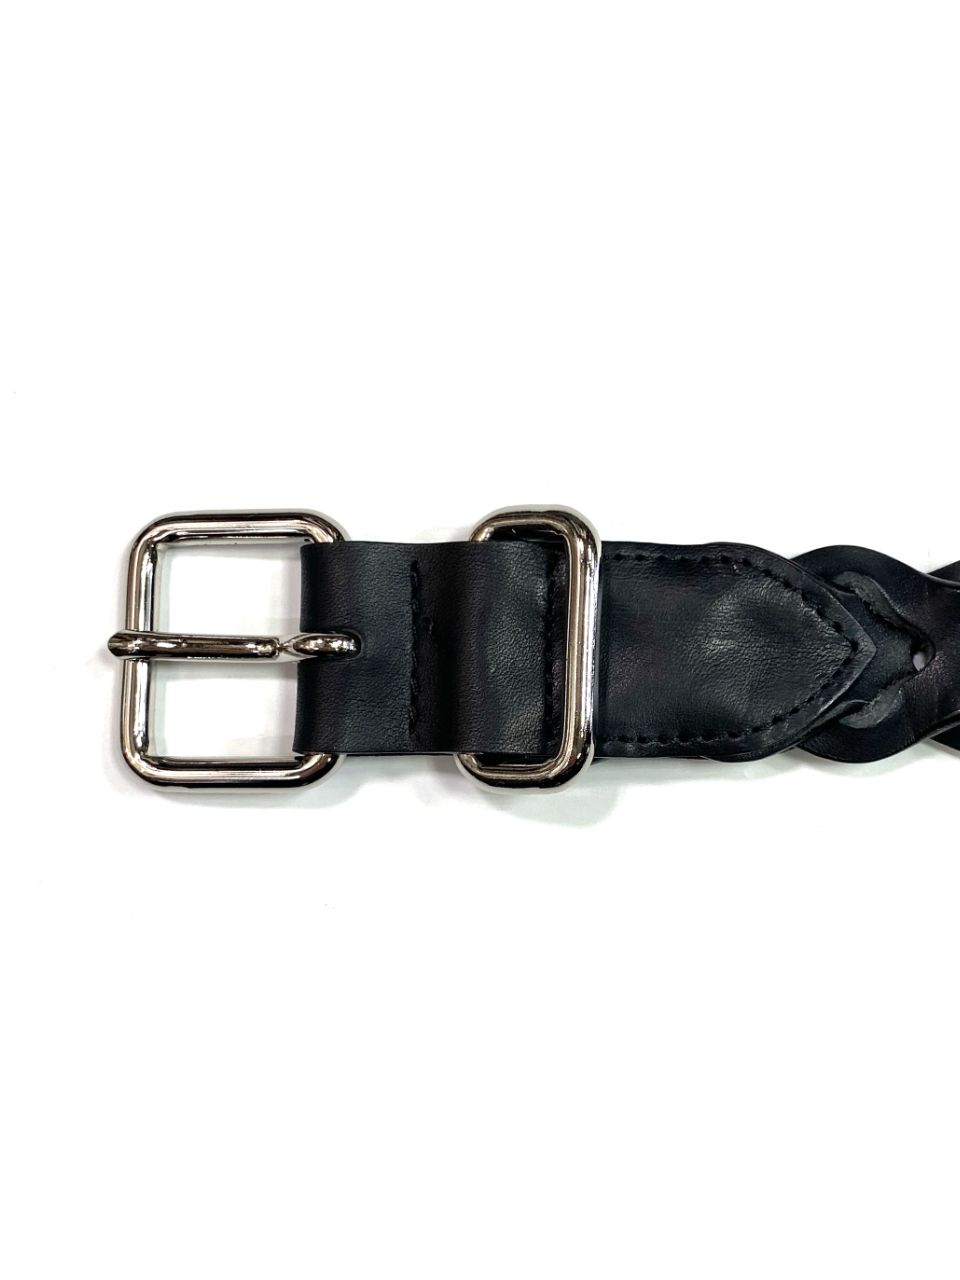 COOTIE PRODUCTIONS - Leather Braid Belt (SILVER) / レザー メッシュ 